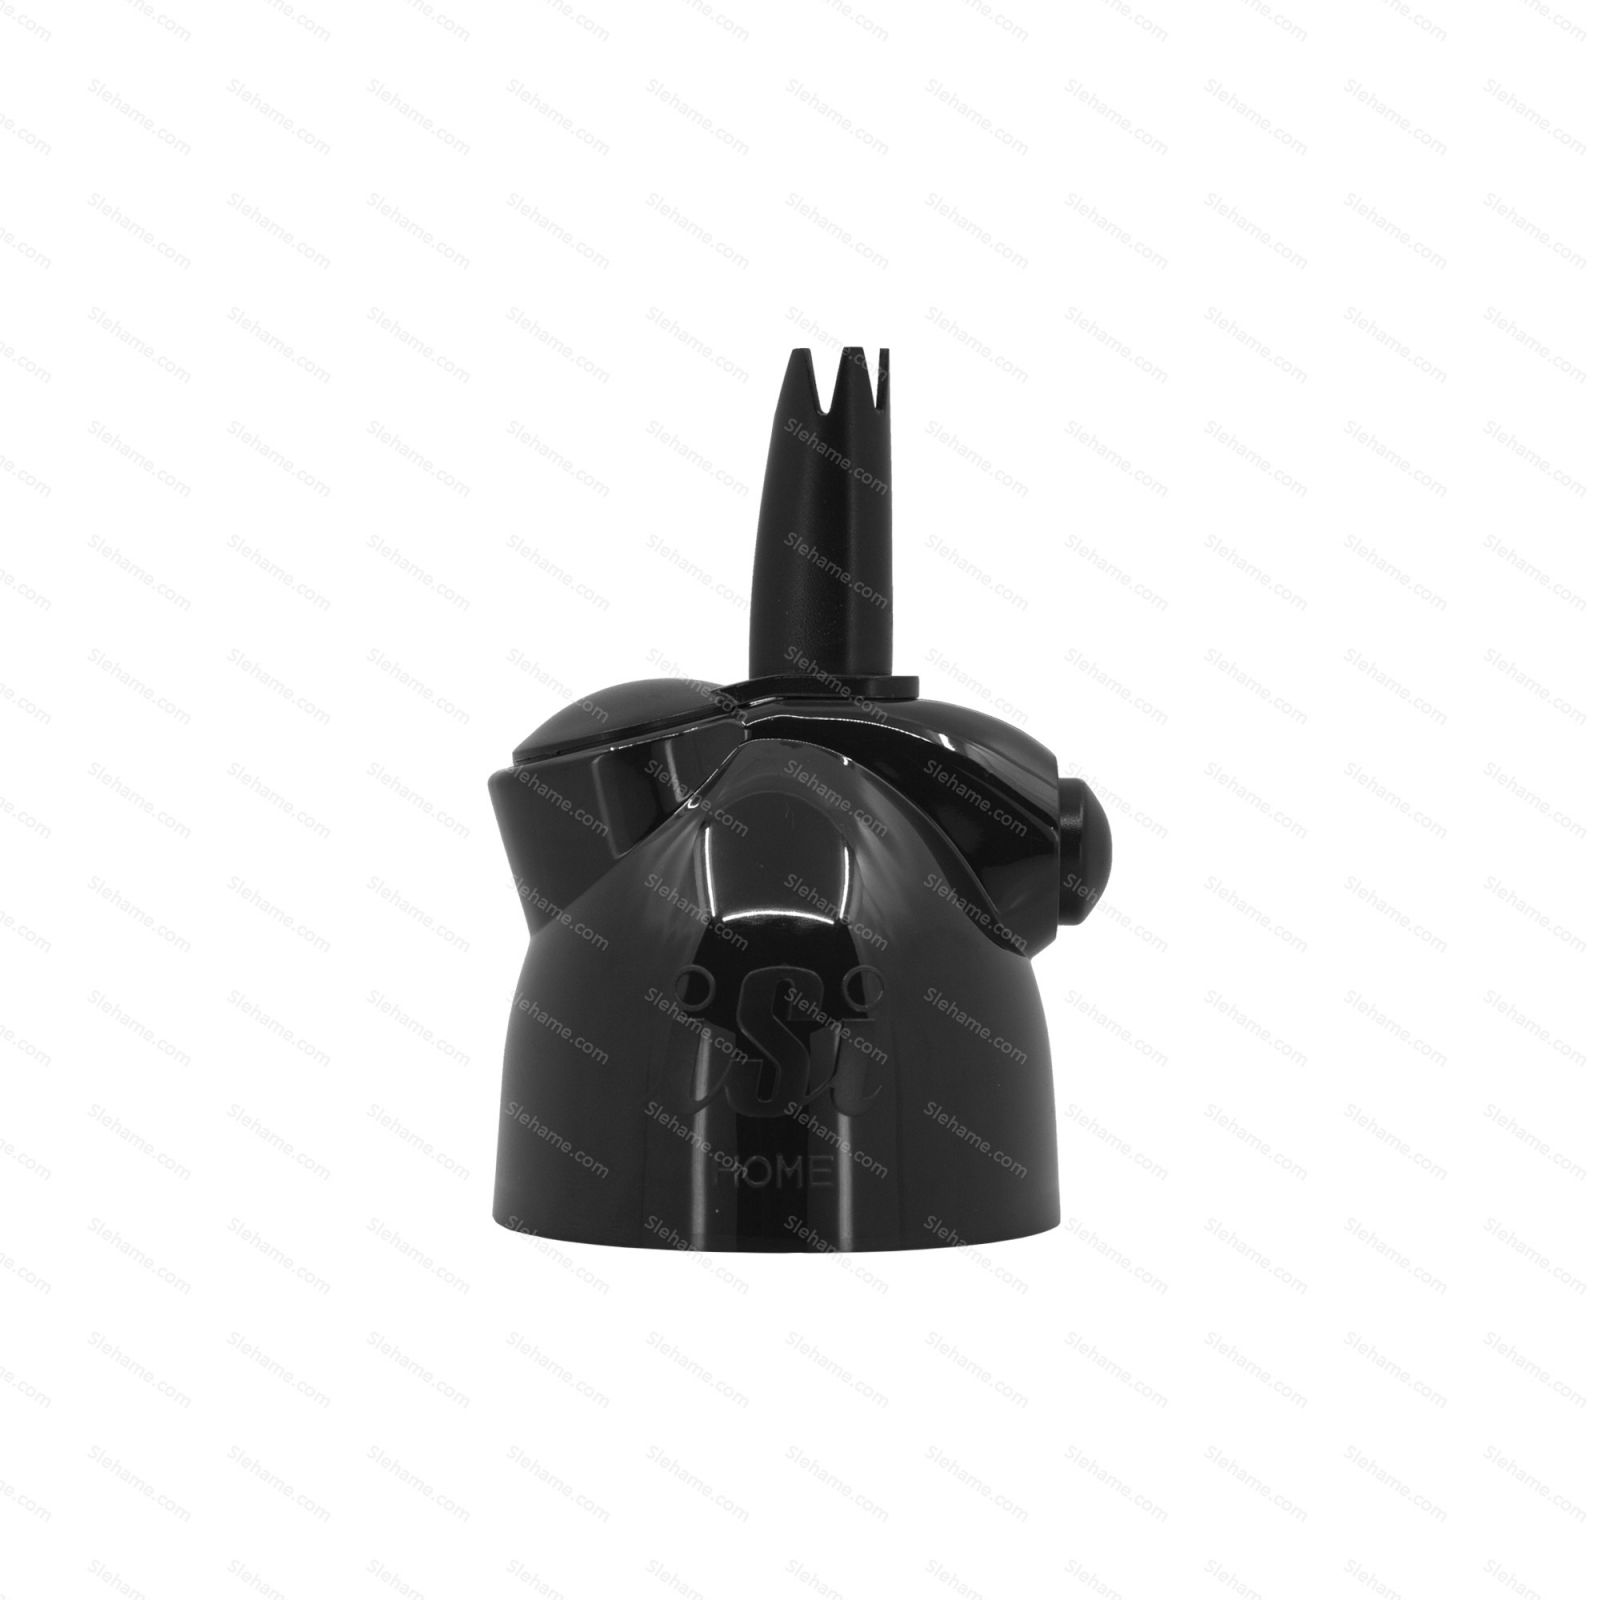 Replacement head iSi EASY WHIP PLUS, black - front view